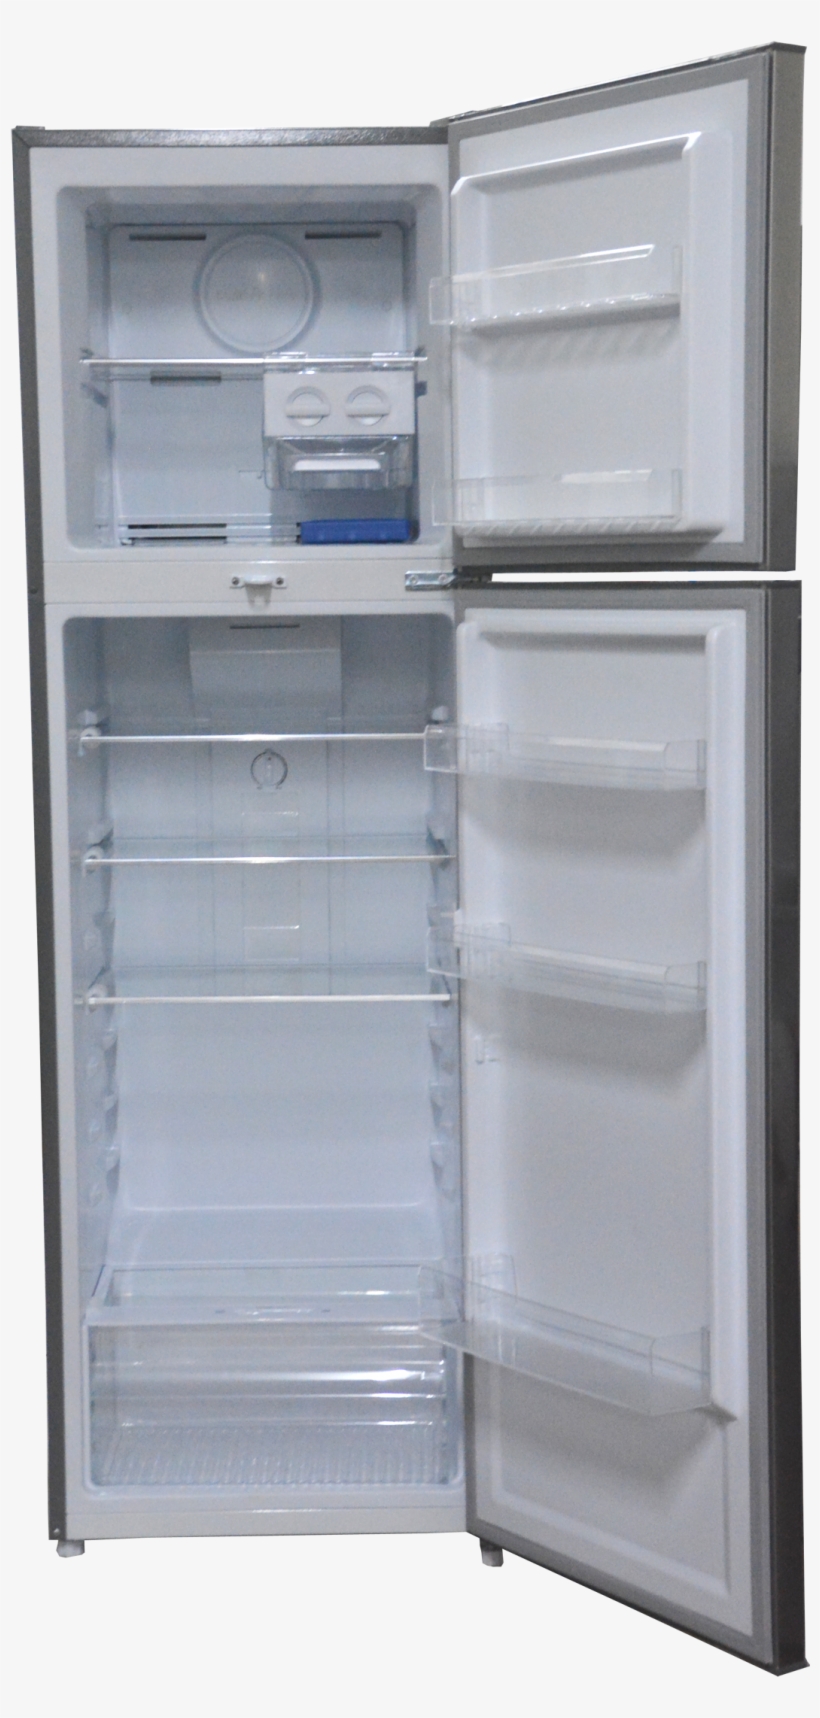 No Frost Refrigerator, 251l, Double Door, Brush Stainless - Refrigerator, transparent png #10068849